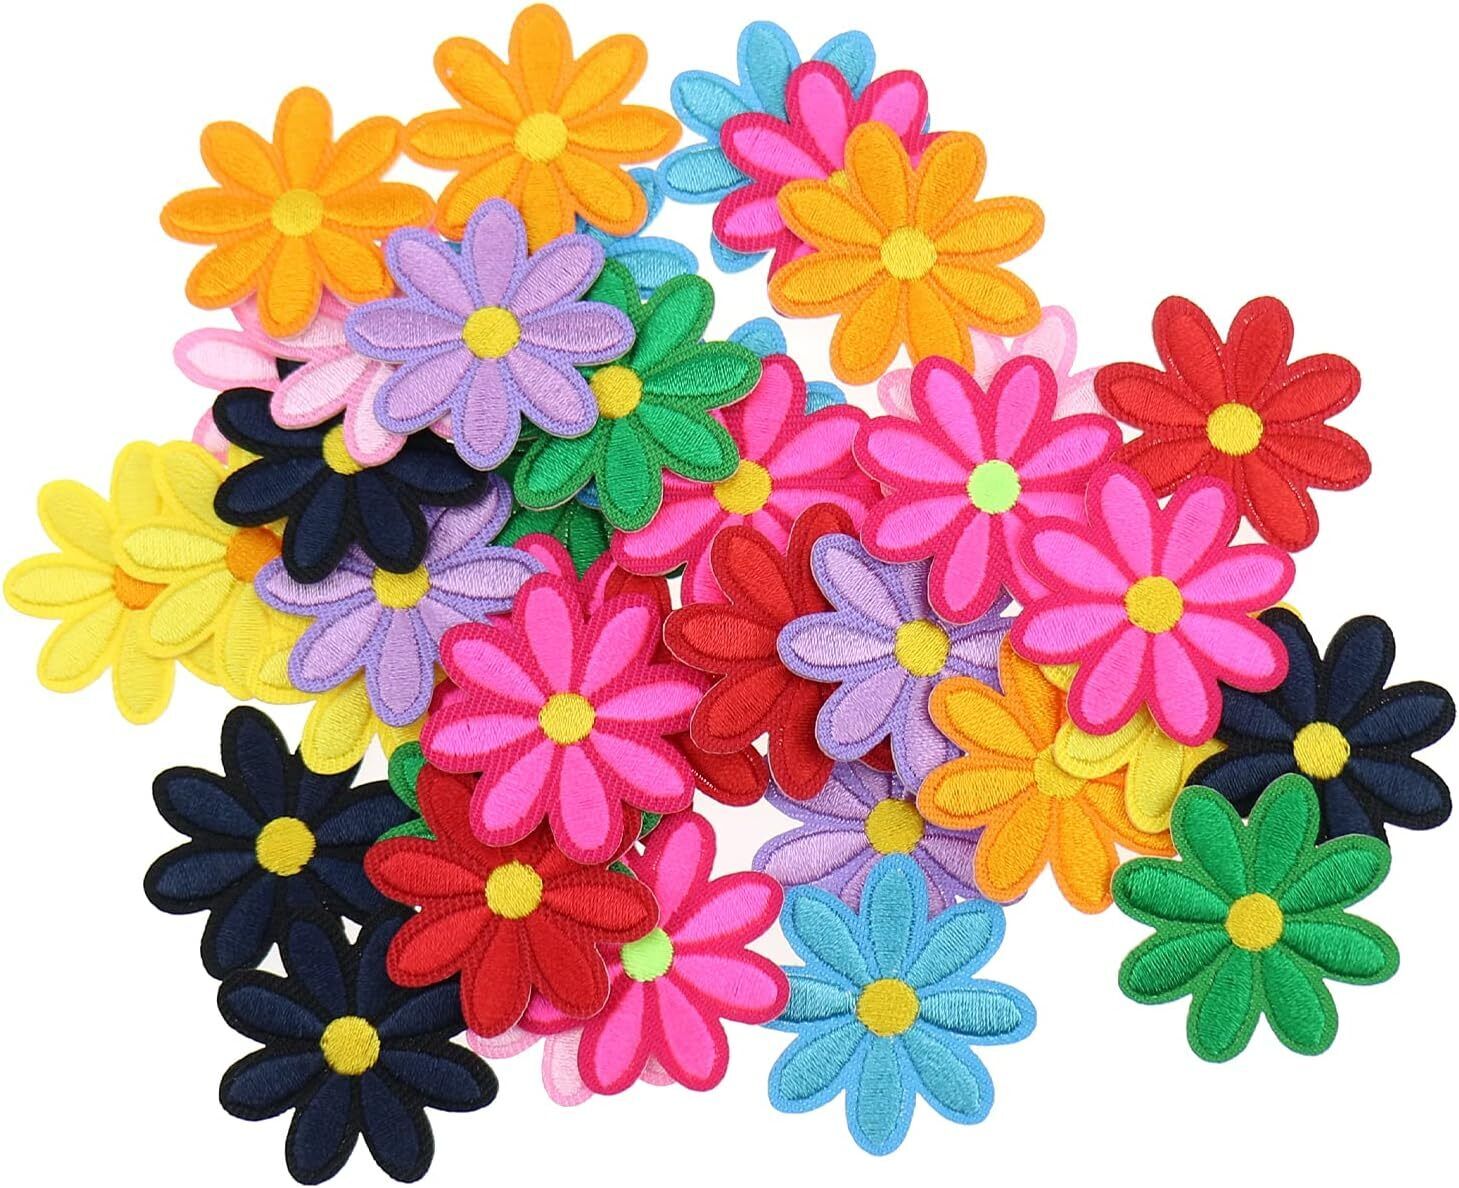 40 PCS DAISY Flower Embroidered Patch single sew iron on Patches 3.5cmx3.5cm ,UK